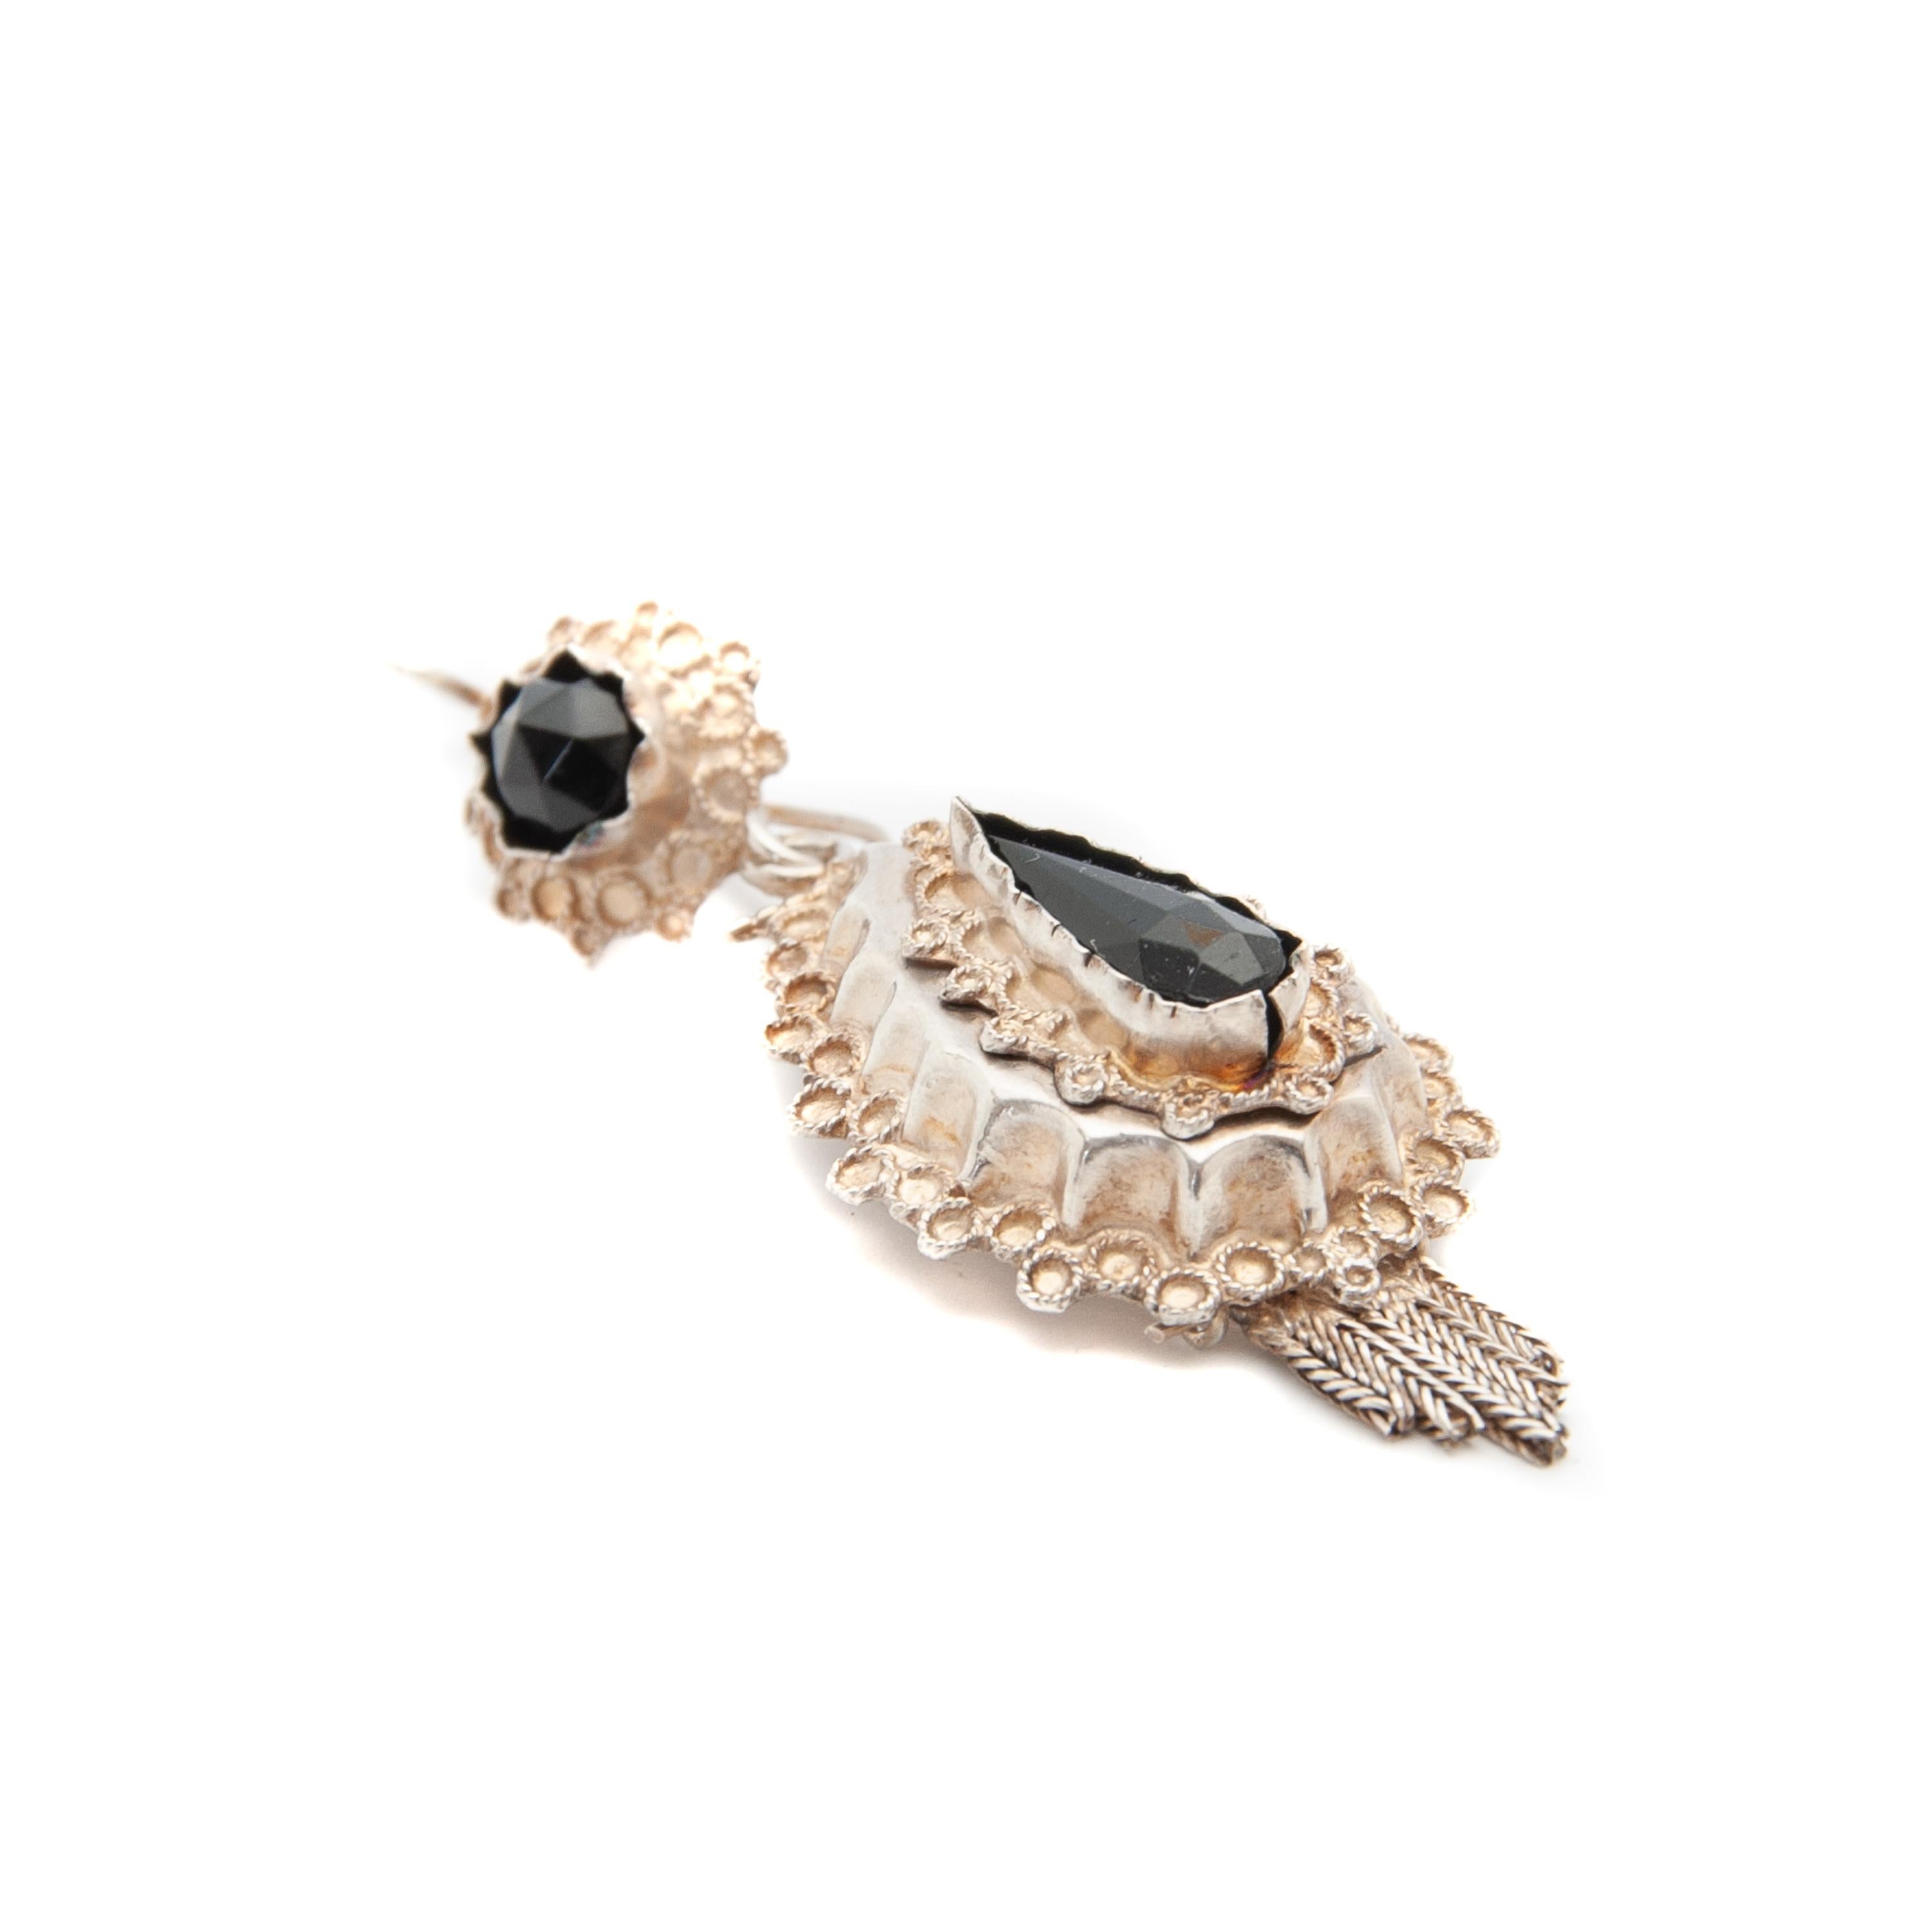 This earring was part of the regional dress in The Netherlands and made between 1906 and 1953. The design of the earring is made with fine silver filigree and set with black jet in bezel frame. The beautifully raised edge in its center piece has a